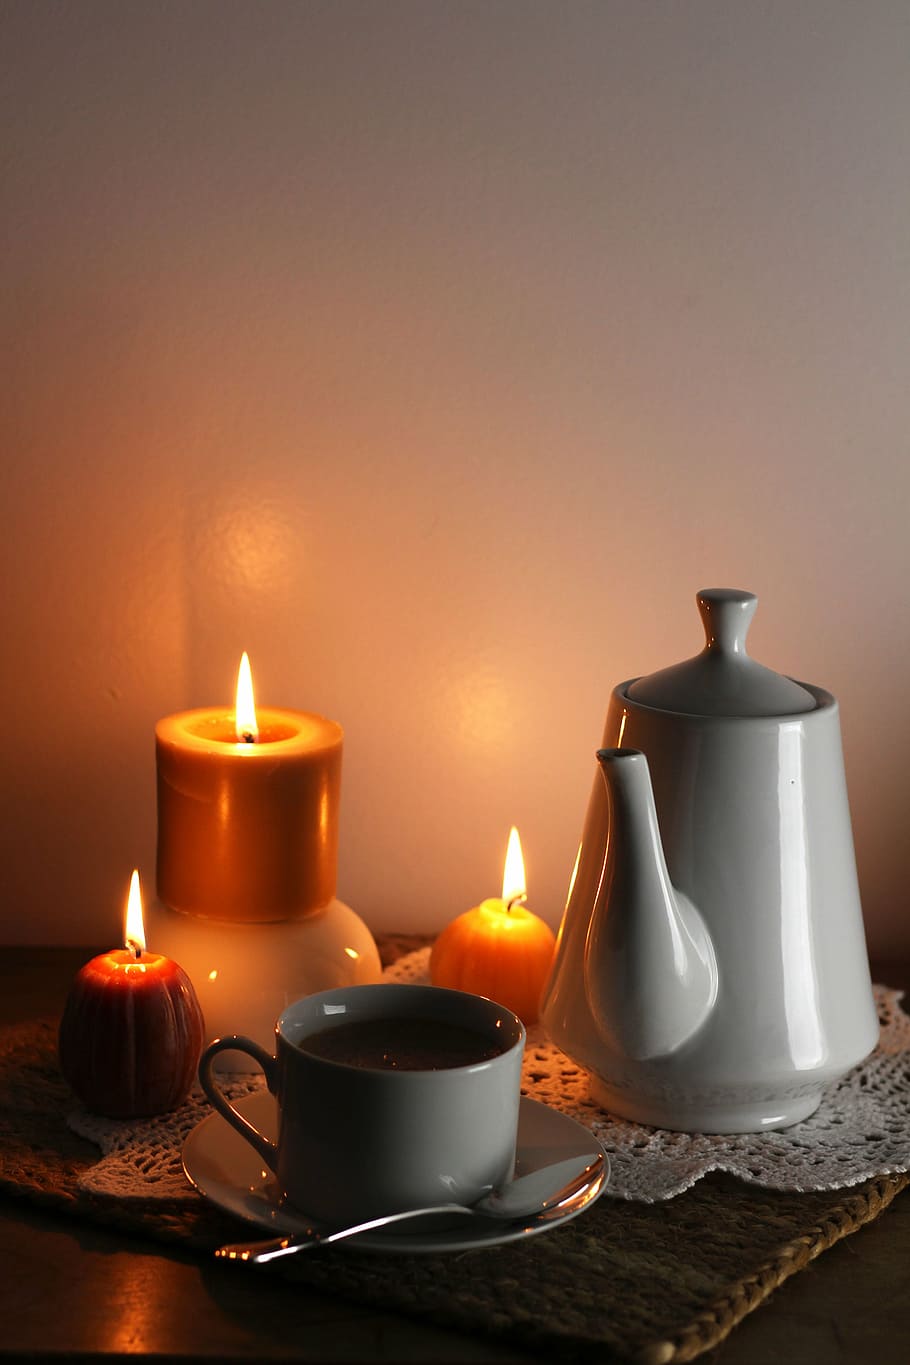 three orange candles beside teacup and teapot on brown mat, coffee